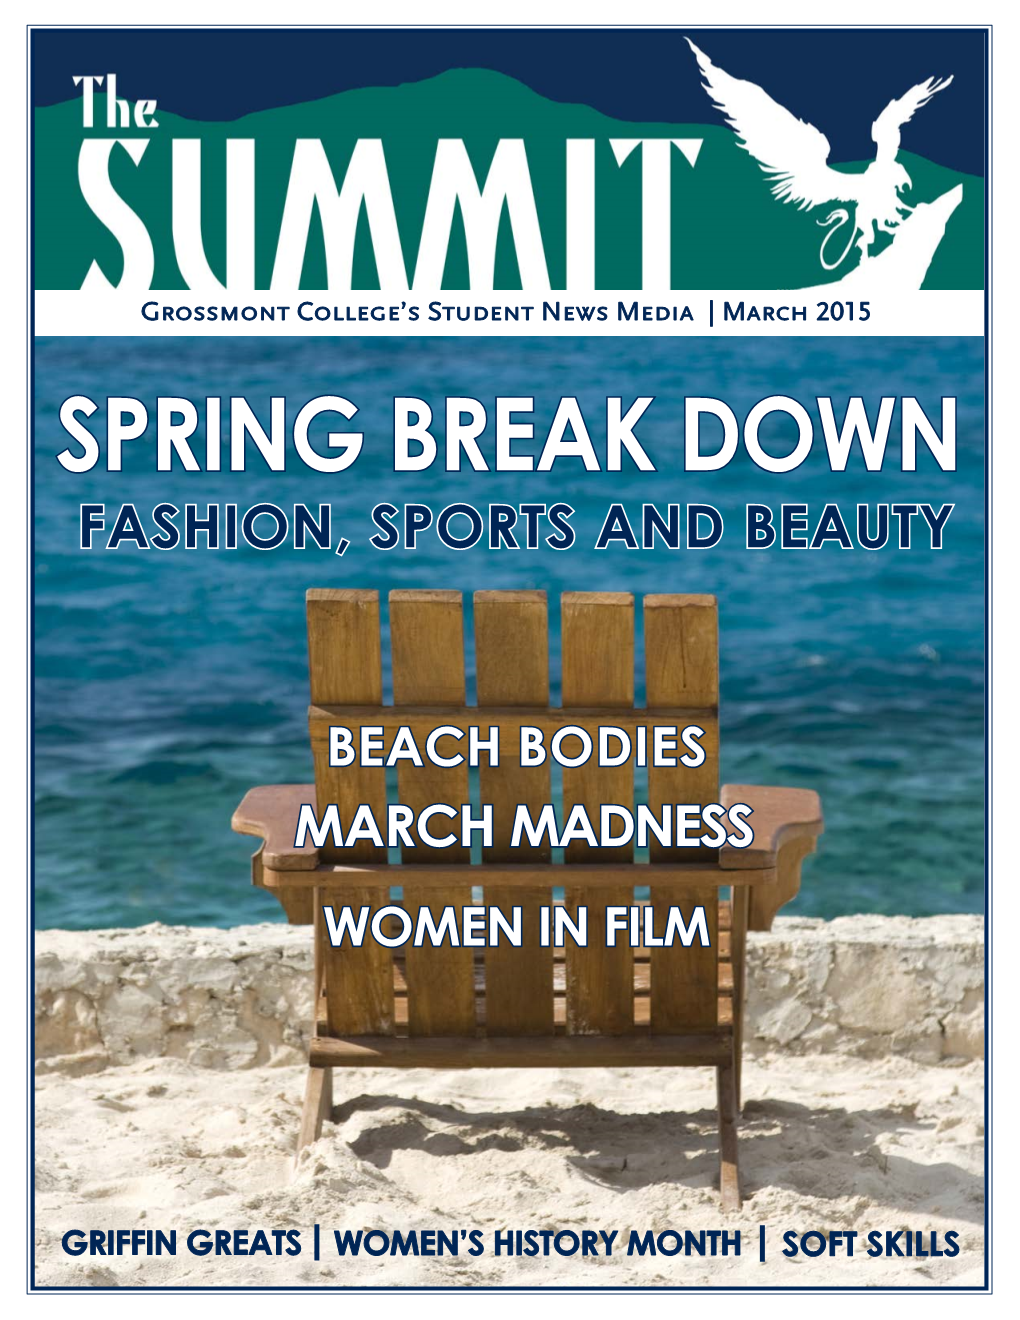 March 2015 SPRING BREAK DOWN FASHION, SPORTS and BEAUTY